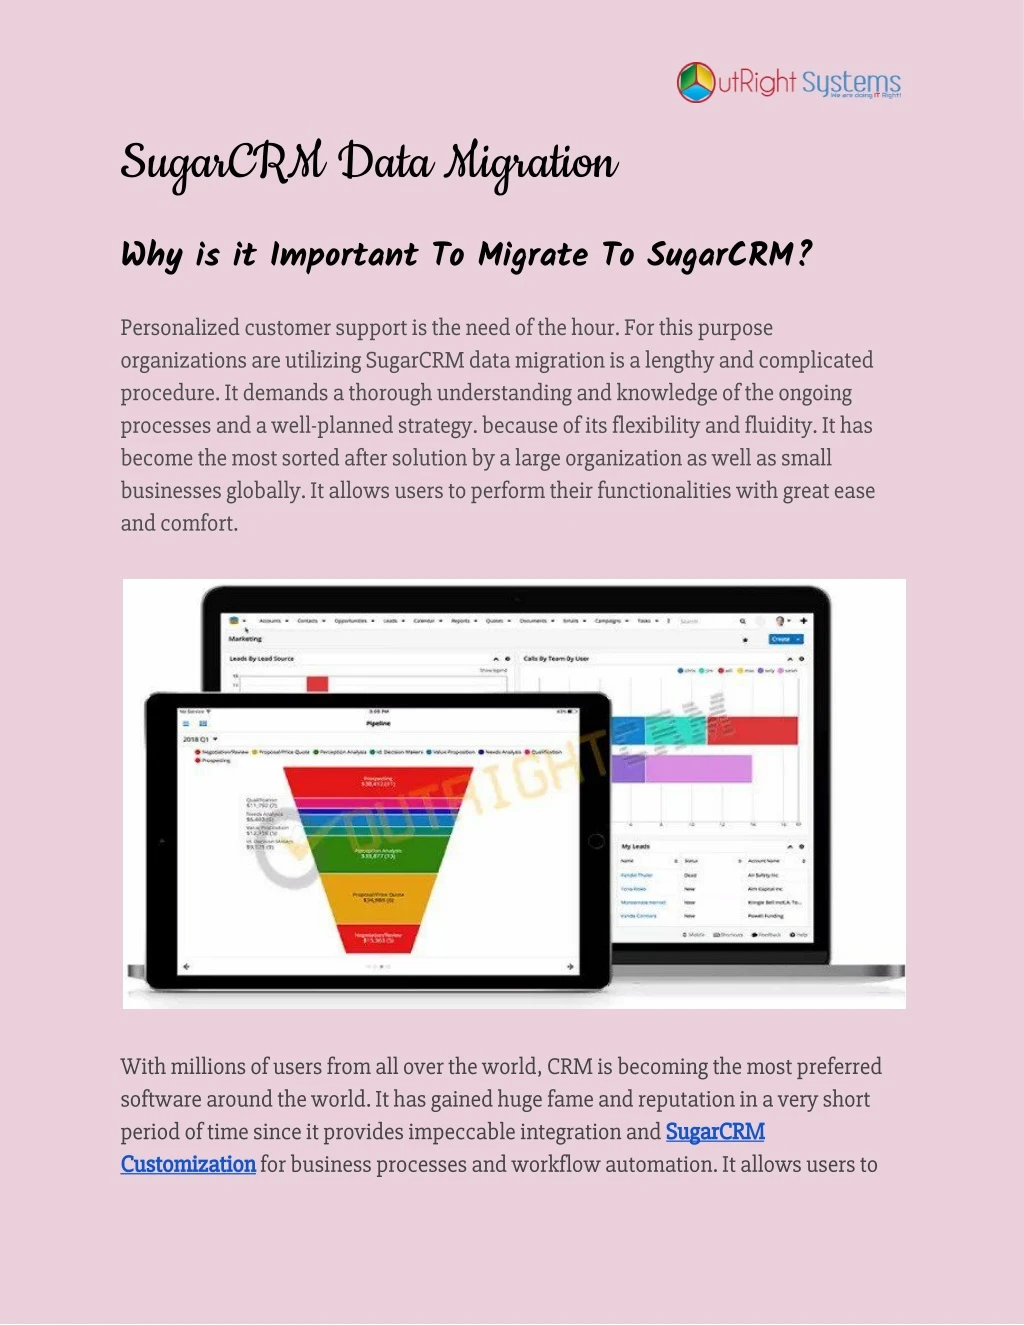 sugarcrm data migration why is it important